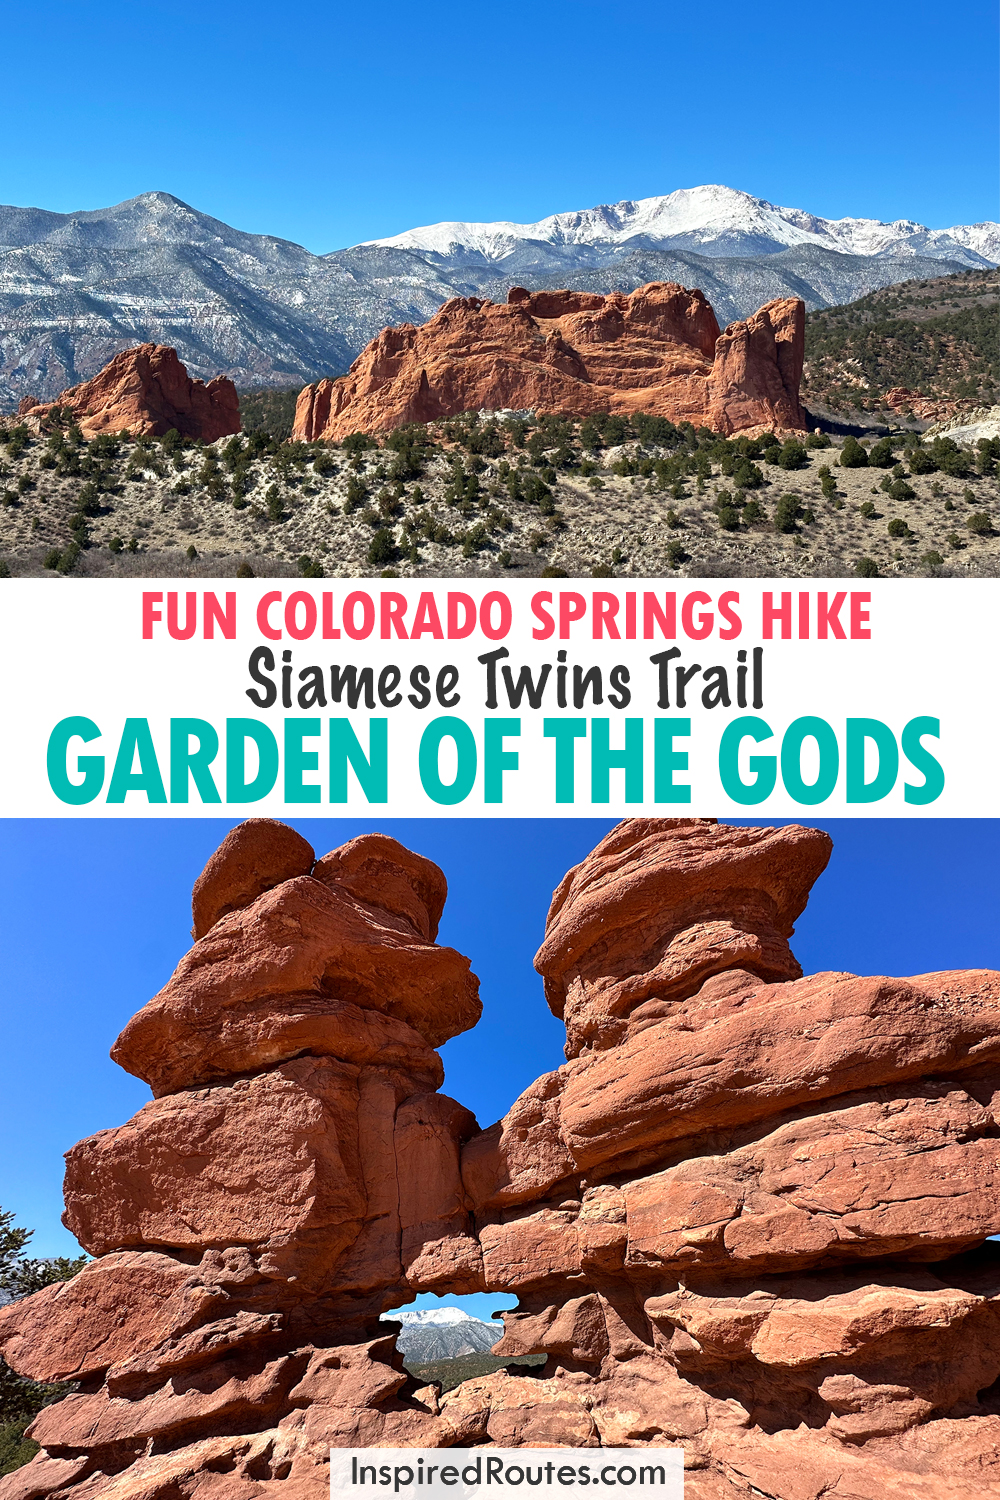 fun Colorado Springs hike siamese twins trail garden of the gods with photos of mountain scene and funky stacked rocks